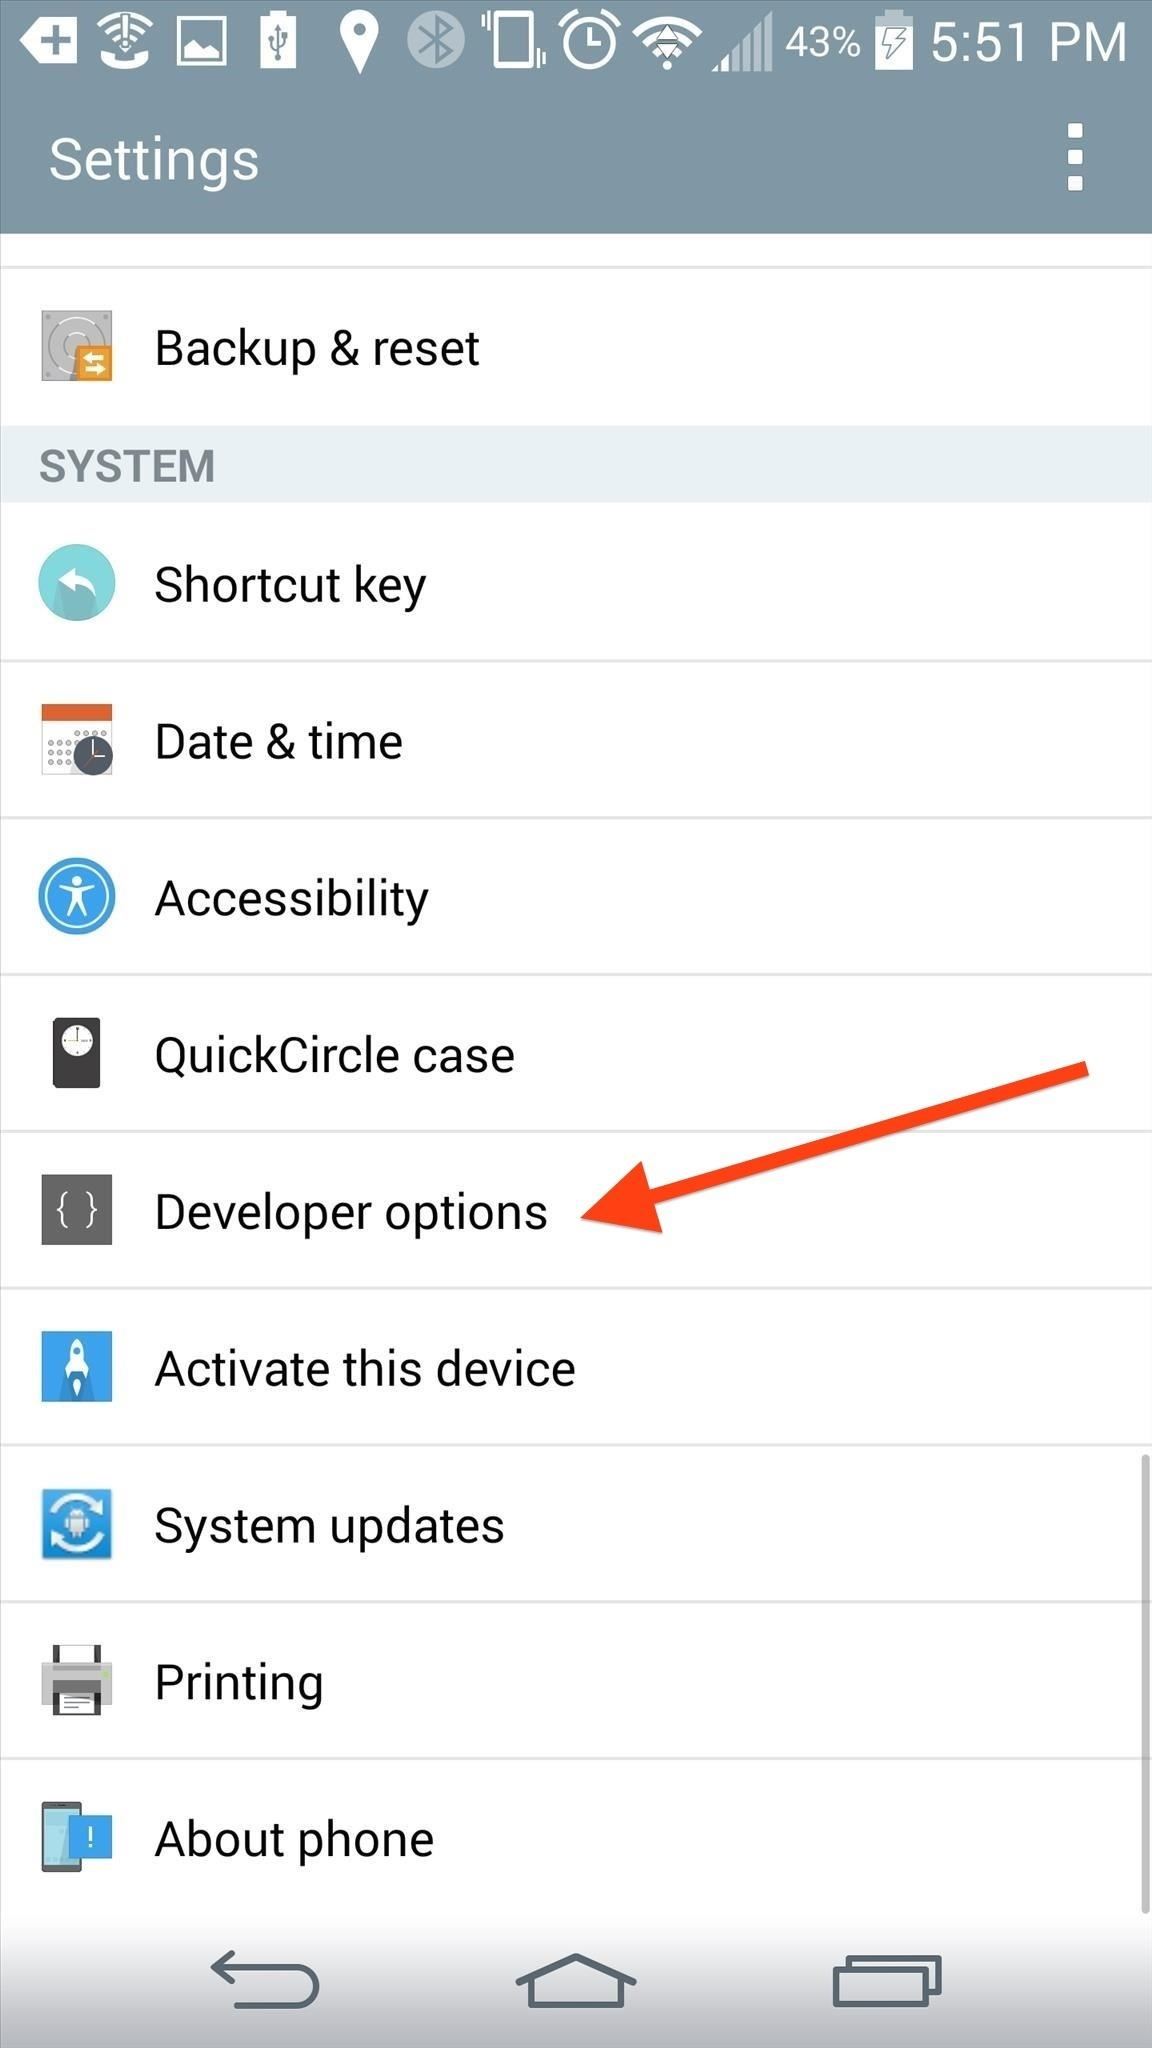 How to Enable the Hidden Developer Options & USB Debugging on the LG G3